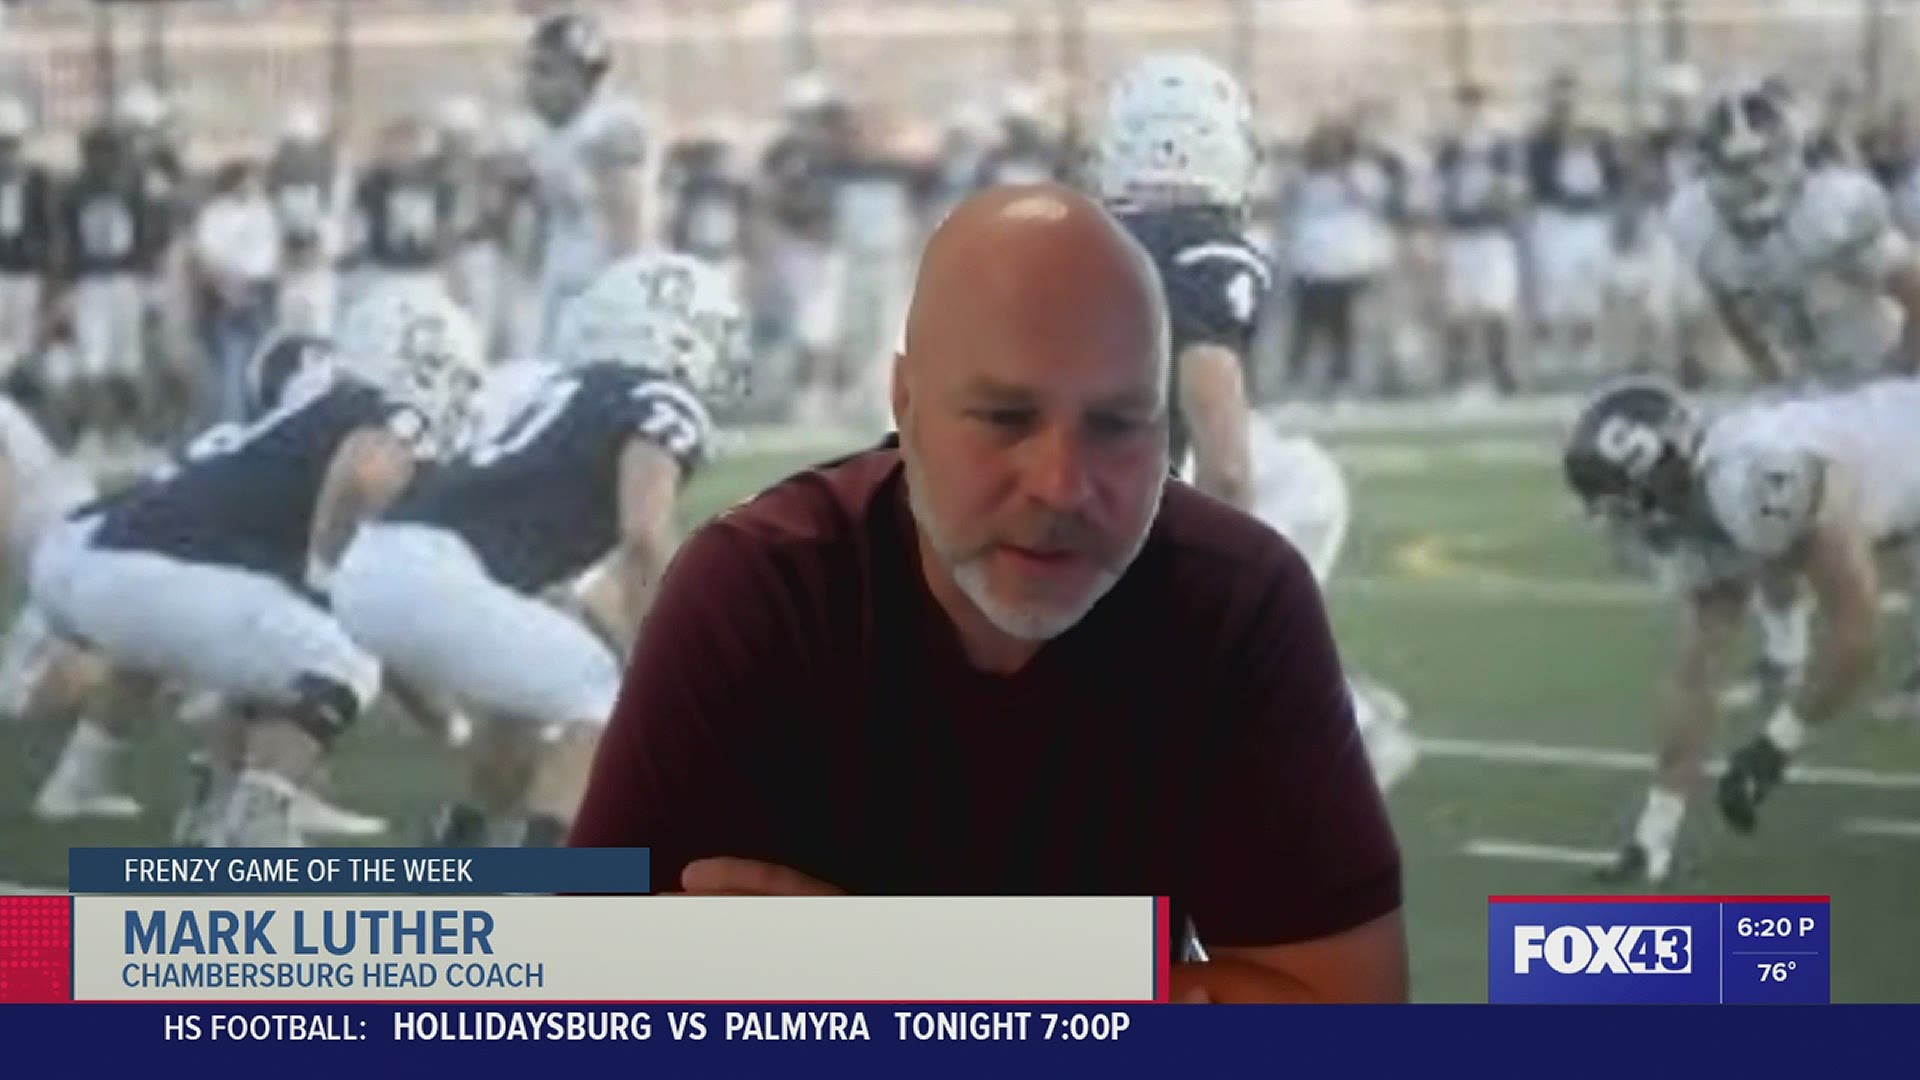 HSFF Game of the Week: Coach Mark Luther Interview